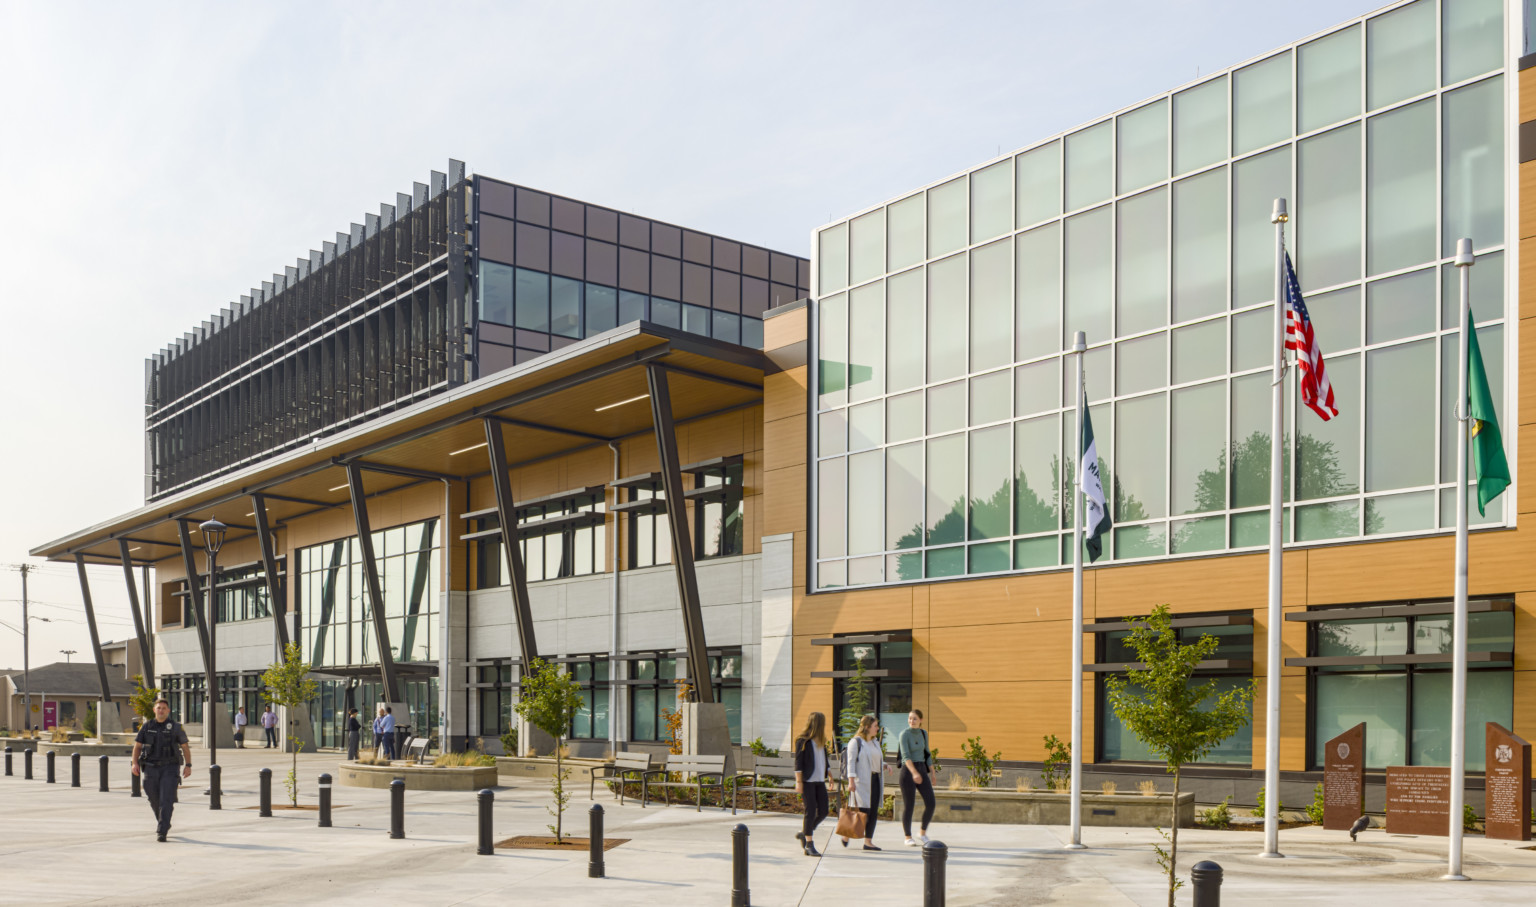 Exterior of Marysville Civic Center in Washington. A multistory building with glass facade